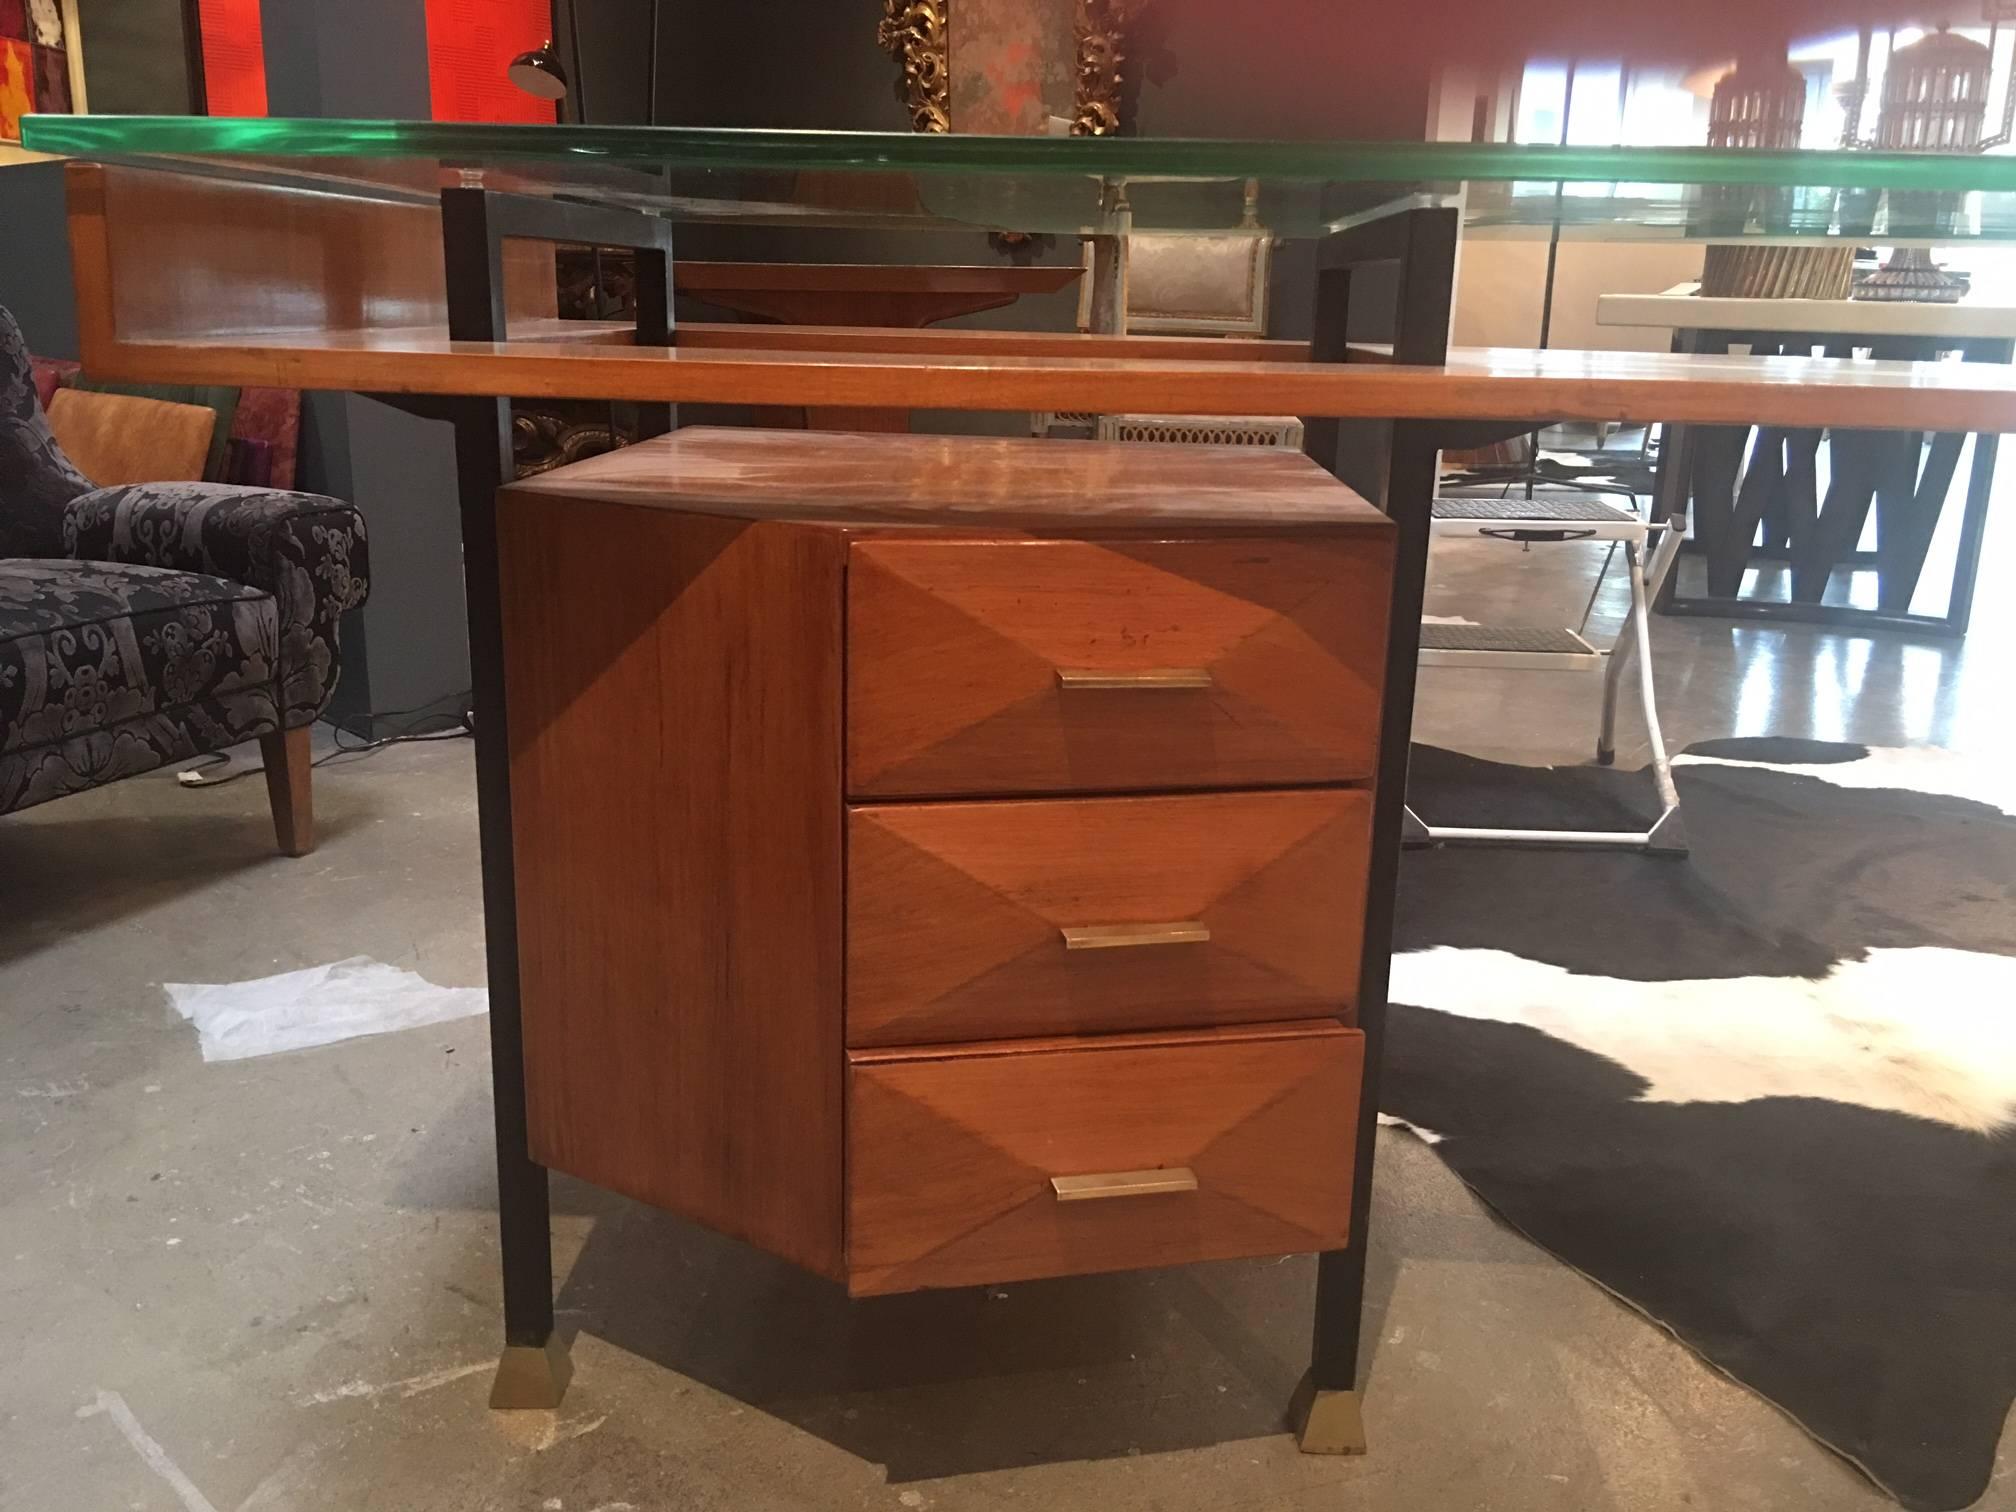 Its body configured in the shape of a chevron. Its drawer compartments exhibiting pyramidal relief detail, embellished by pulls, all below a floating glass top. The whole supported by black steel legs.

Italy, (Milan) 1955.